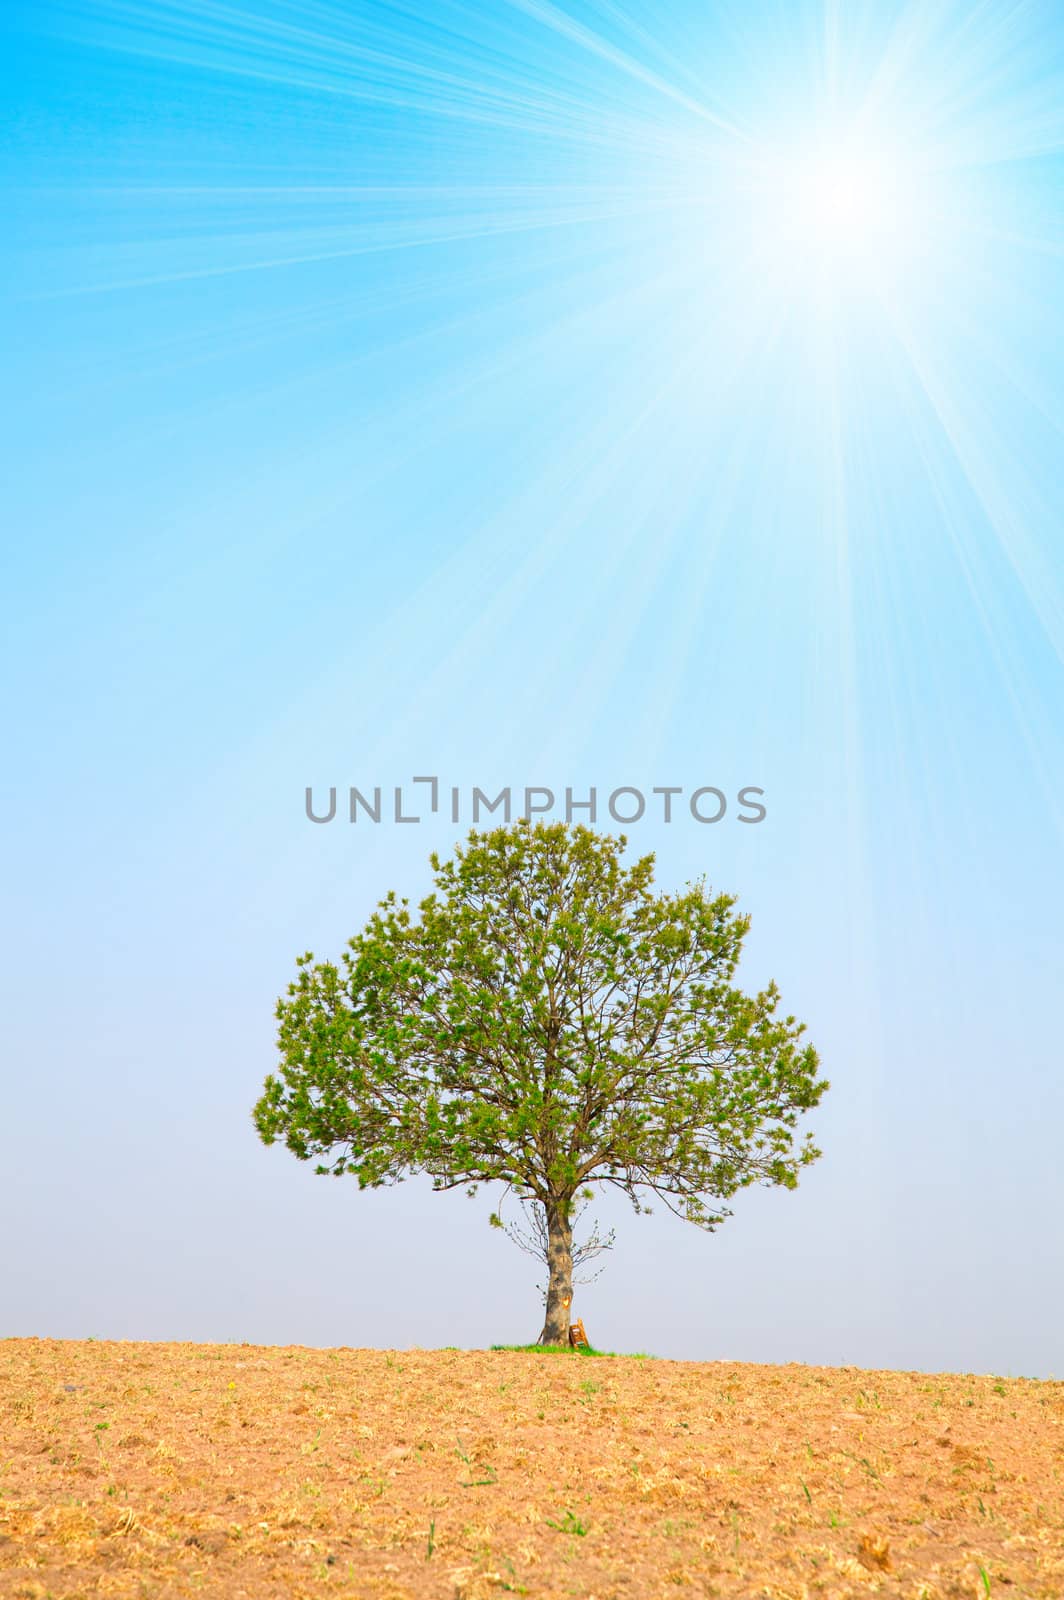 tree and sun on blue sky, around on the ploughed earth.  by motorolka